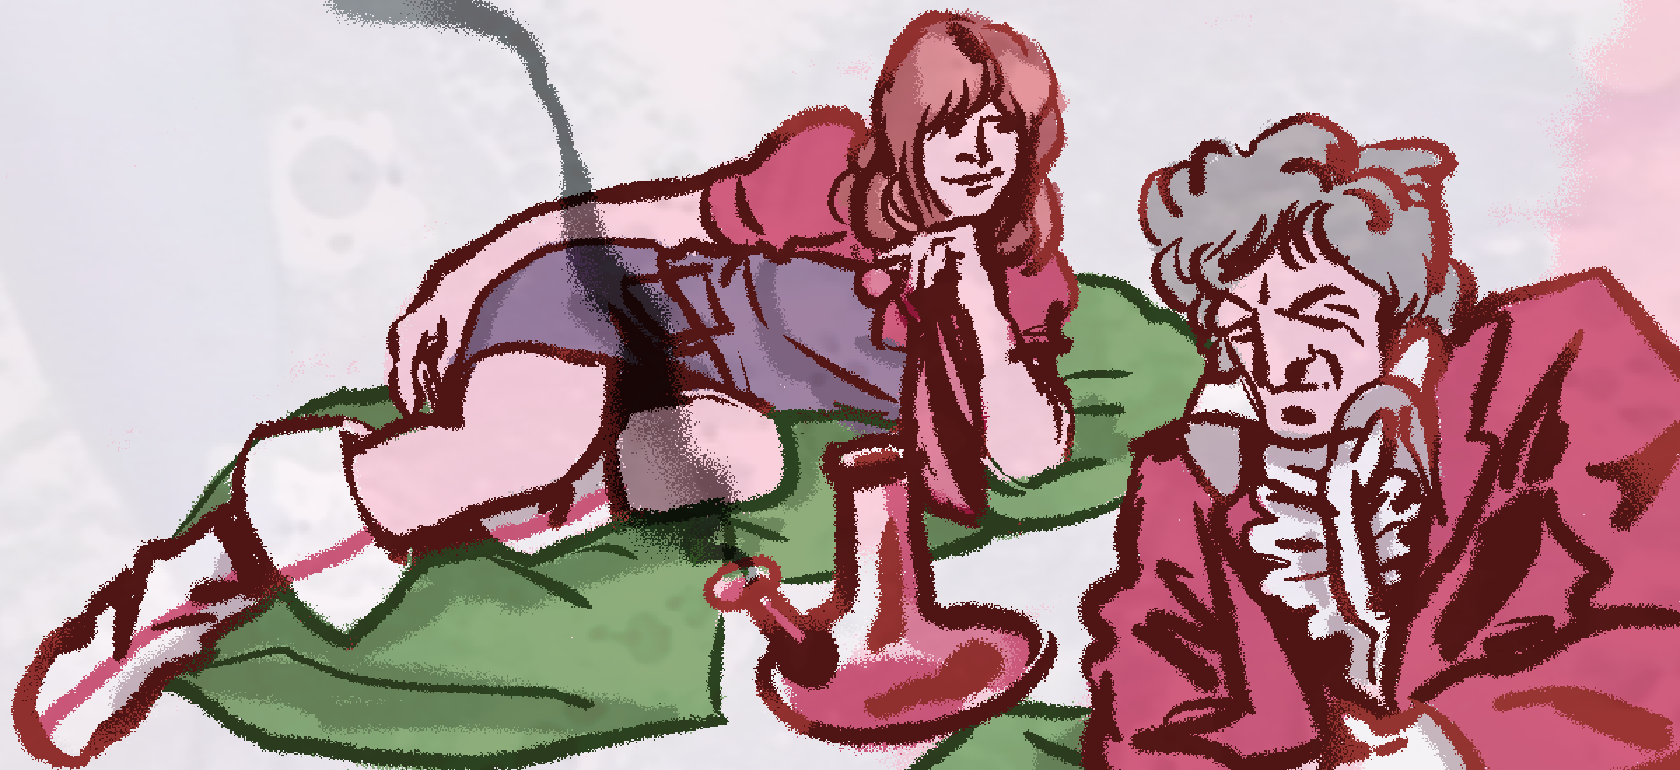 Pixel art doodle of Jo Grant and the third Doctor from Doctor Who lying on green pillows with a smoking bong between them. Jo is wearing a red shirt under a blue overall dress and white boots, and the third Doctor is wearing his usual red velvet smoking jacket with a ruffly white shirt underneath.